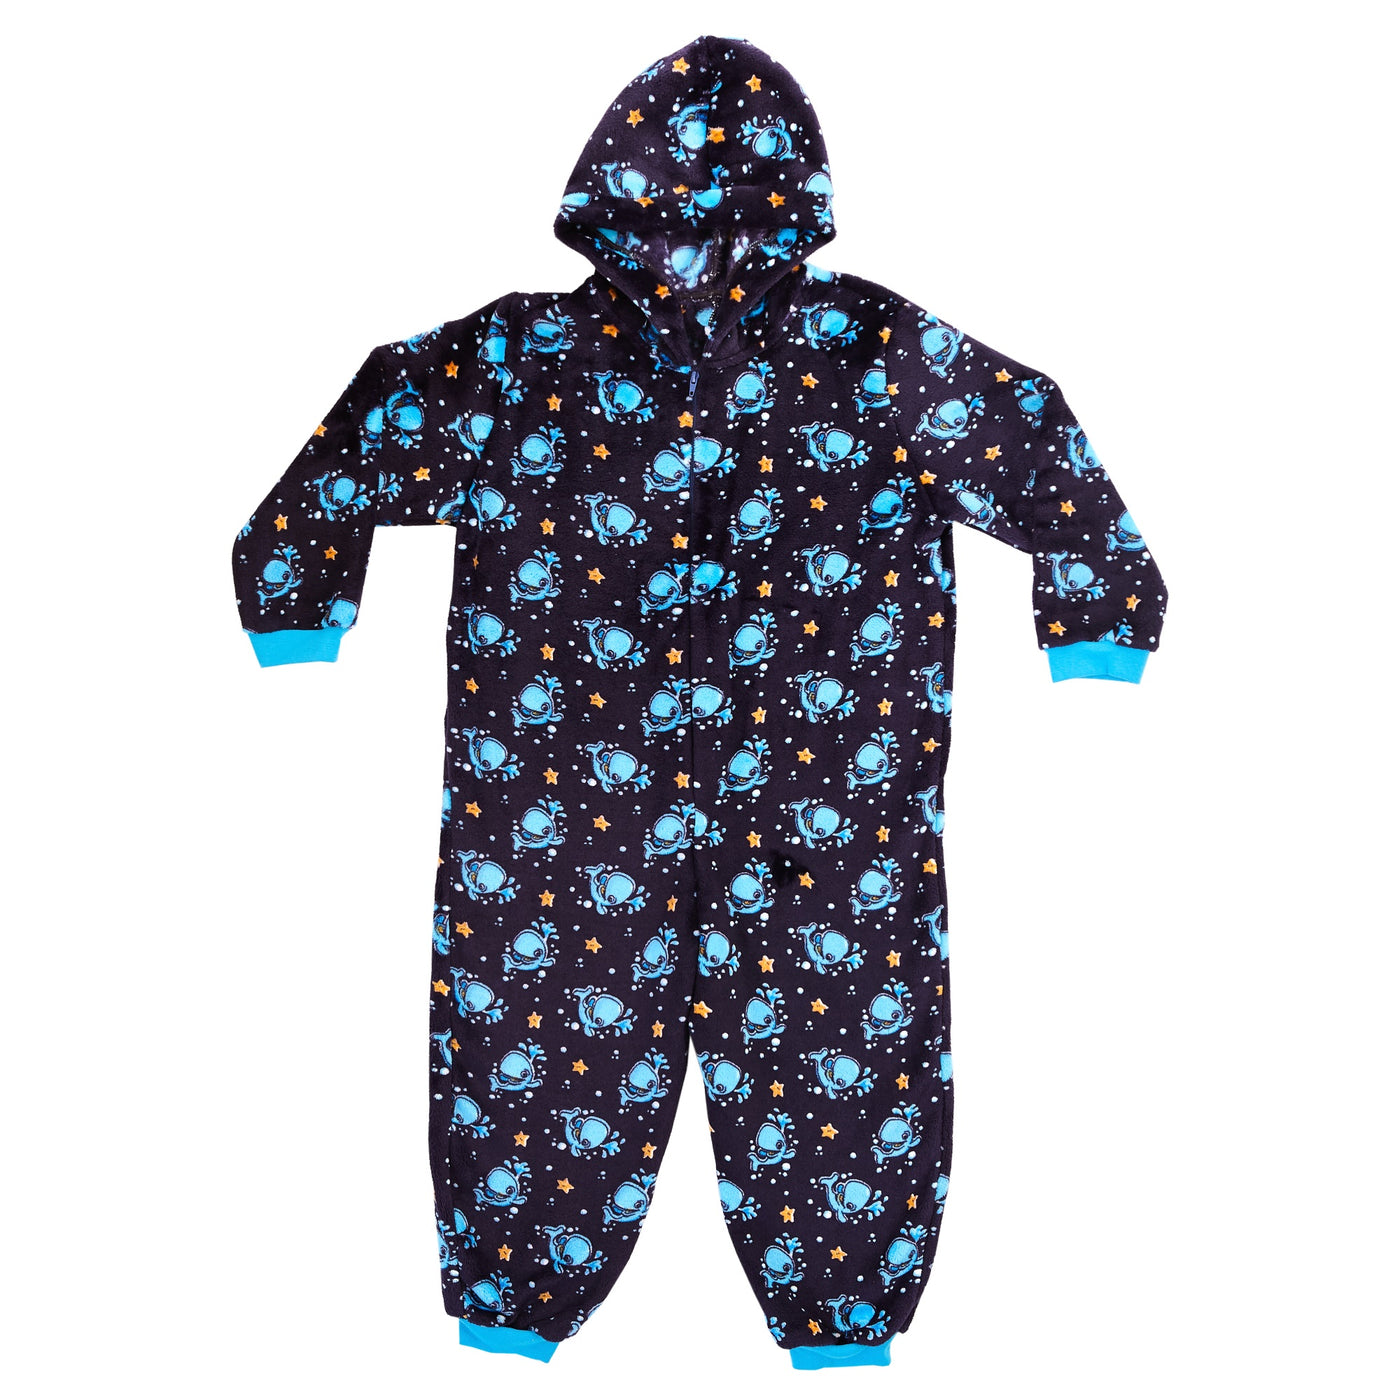 Adult Bubba the whale print onesie